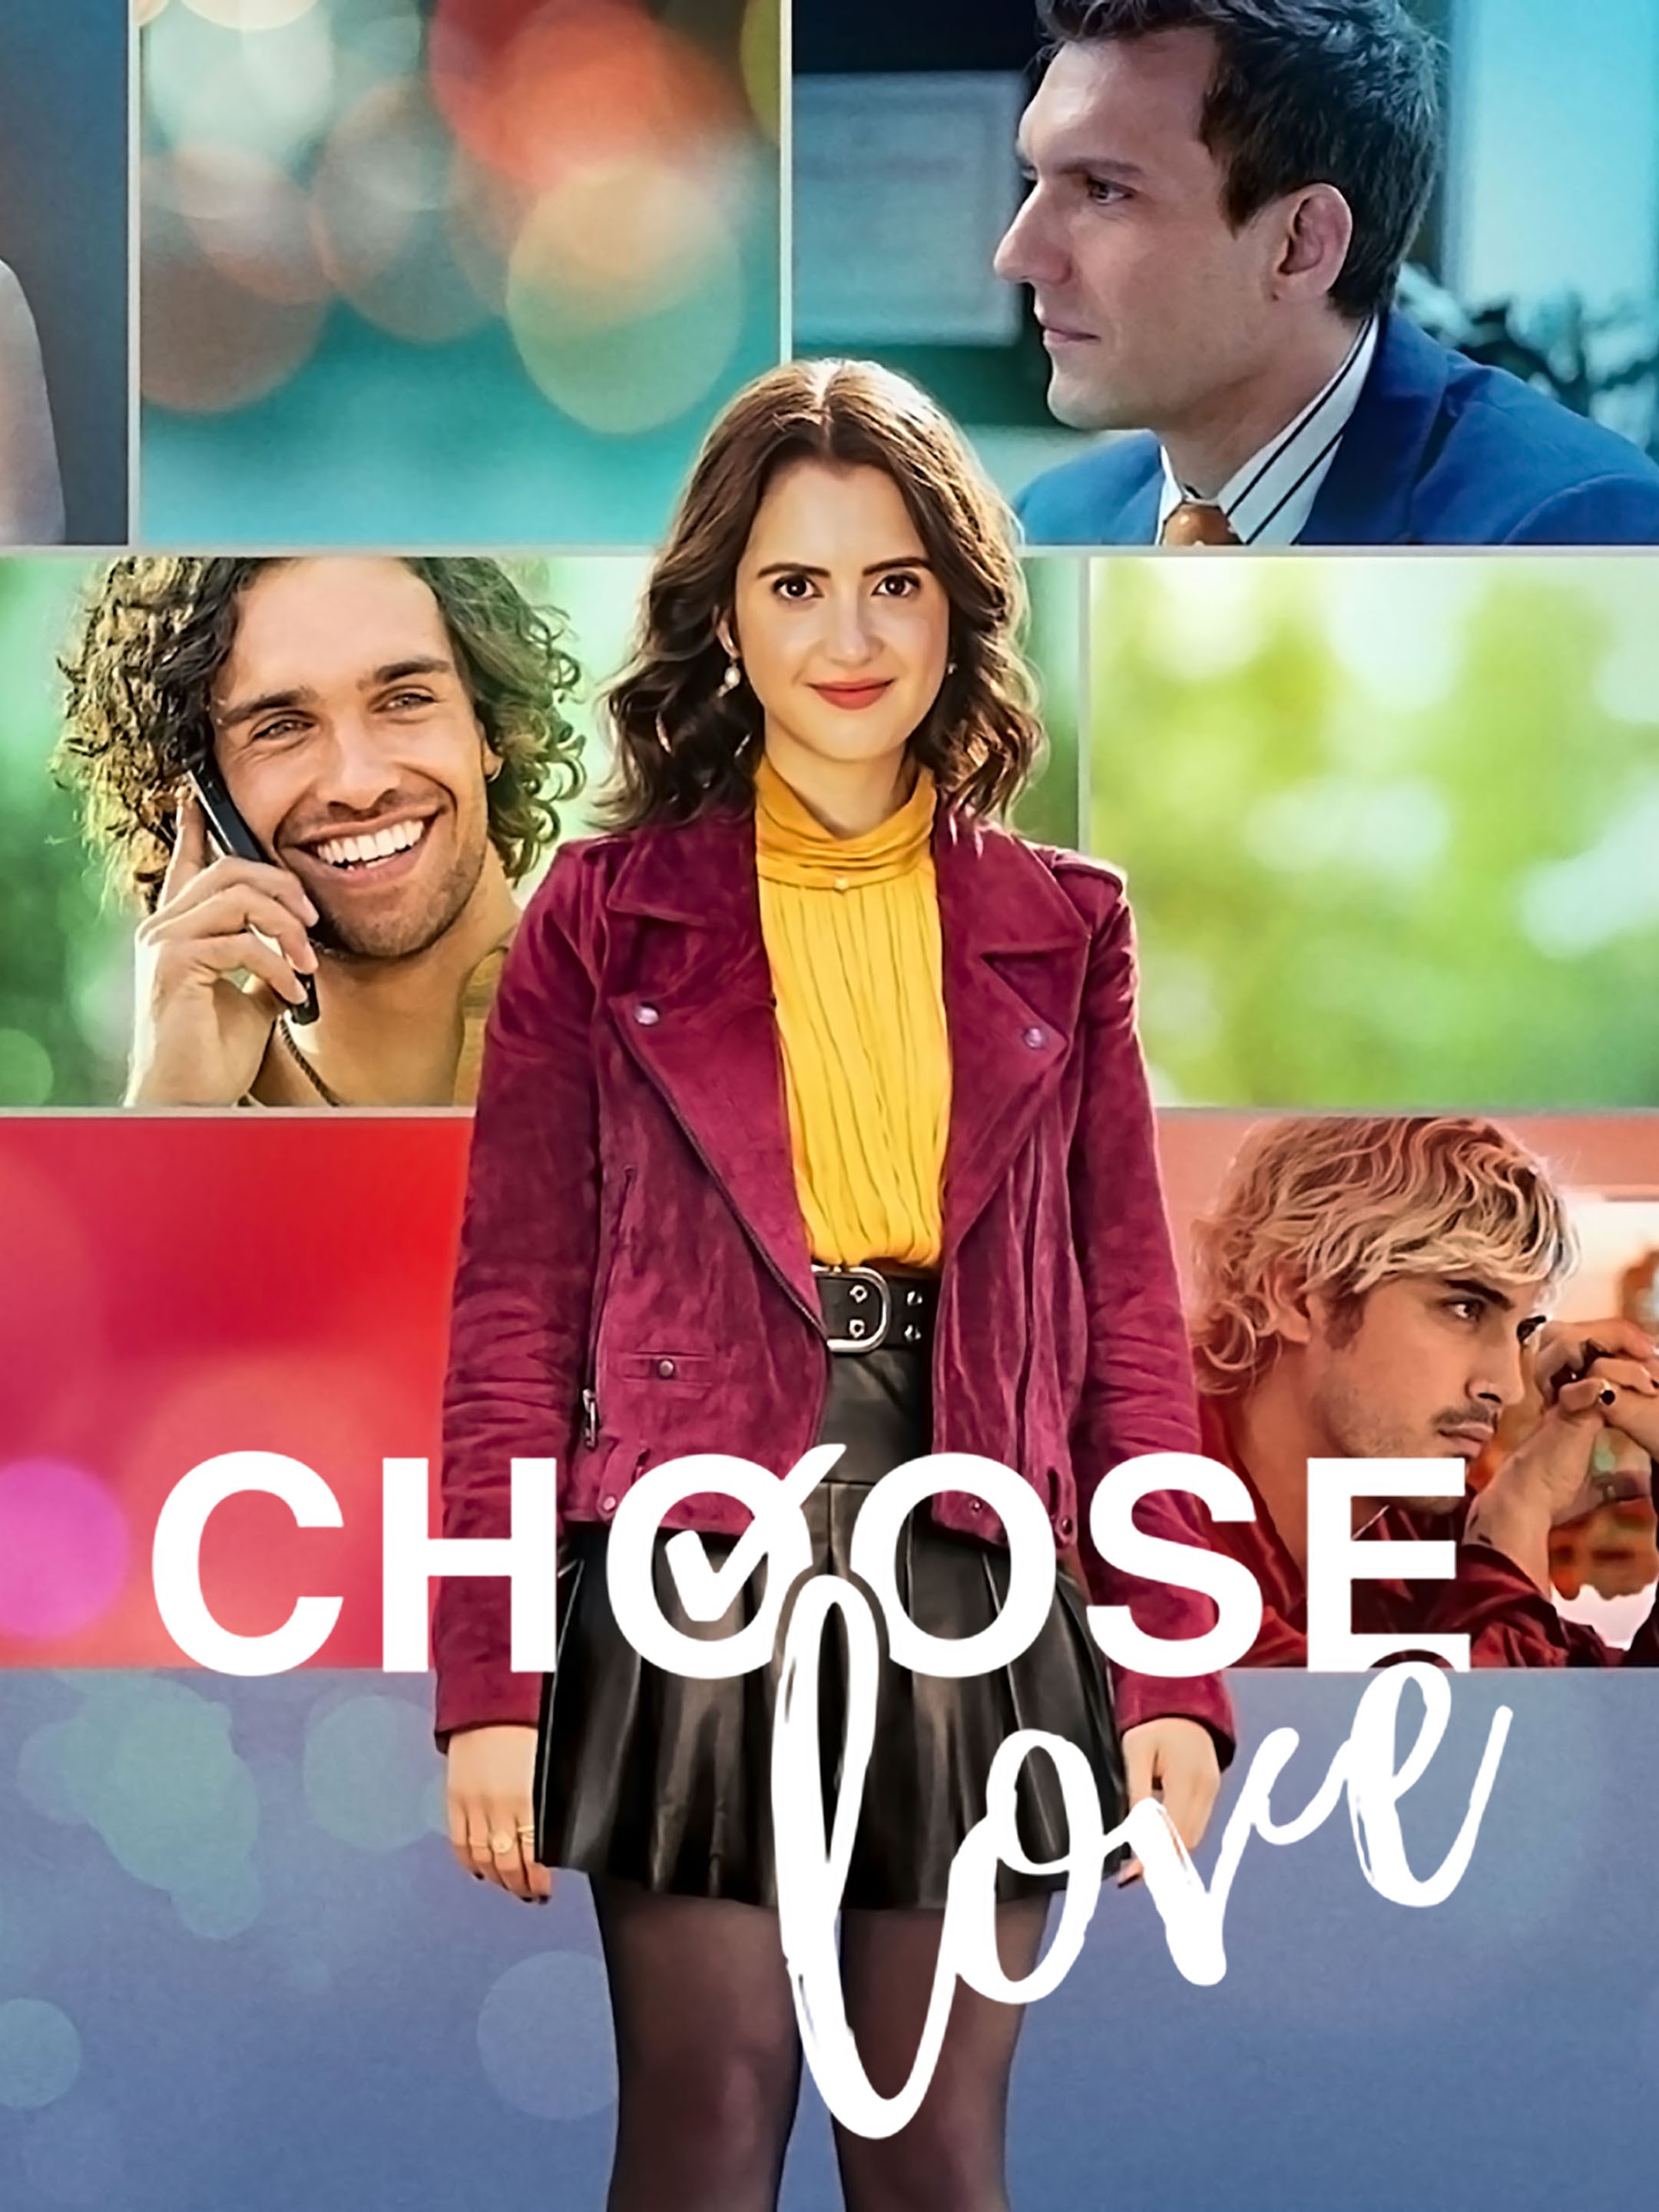 The Choice cast: Who stars in the romance movie?